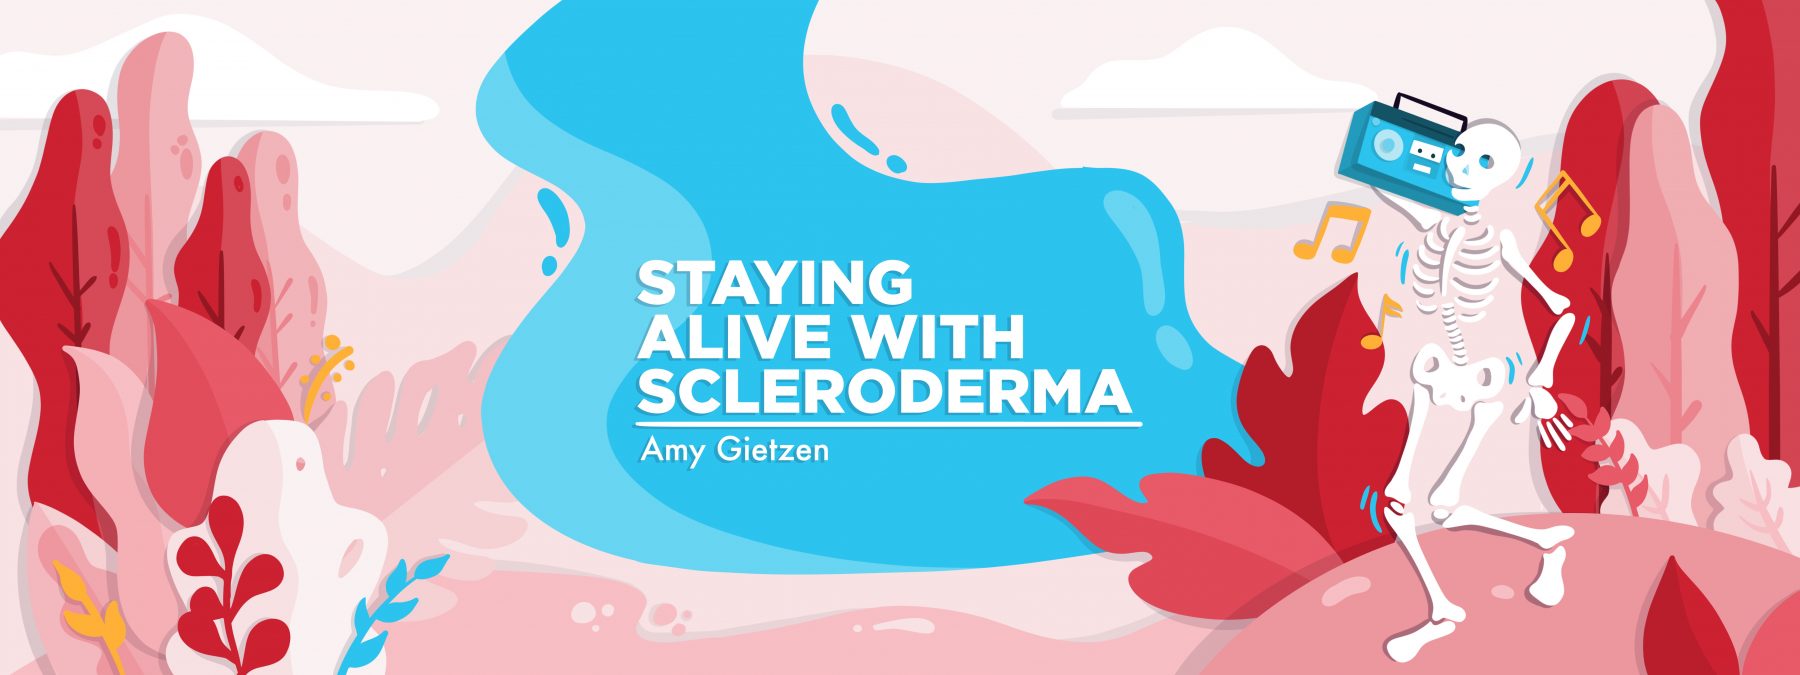 living with scleroderma | Scleroderma News | diagnosis | banner image for 